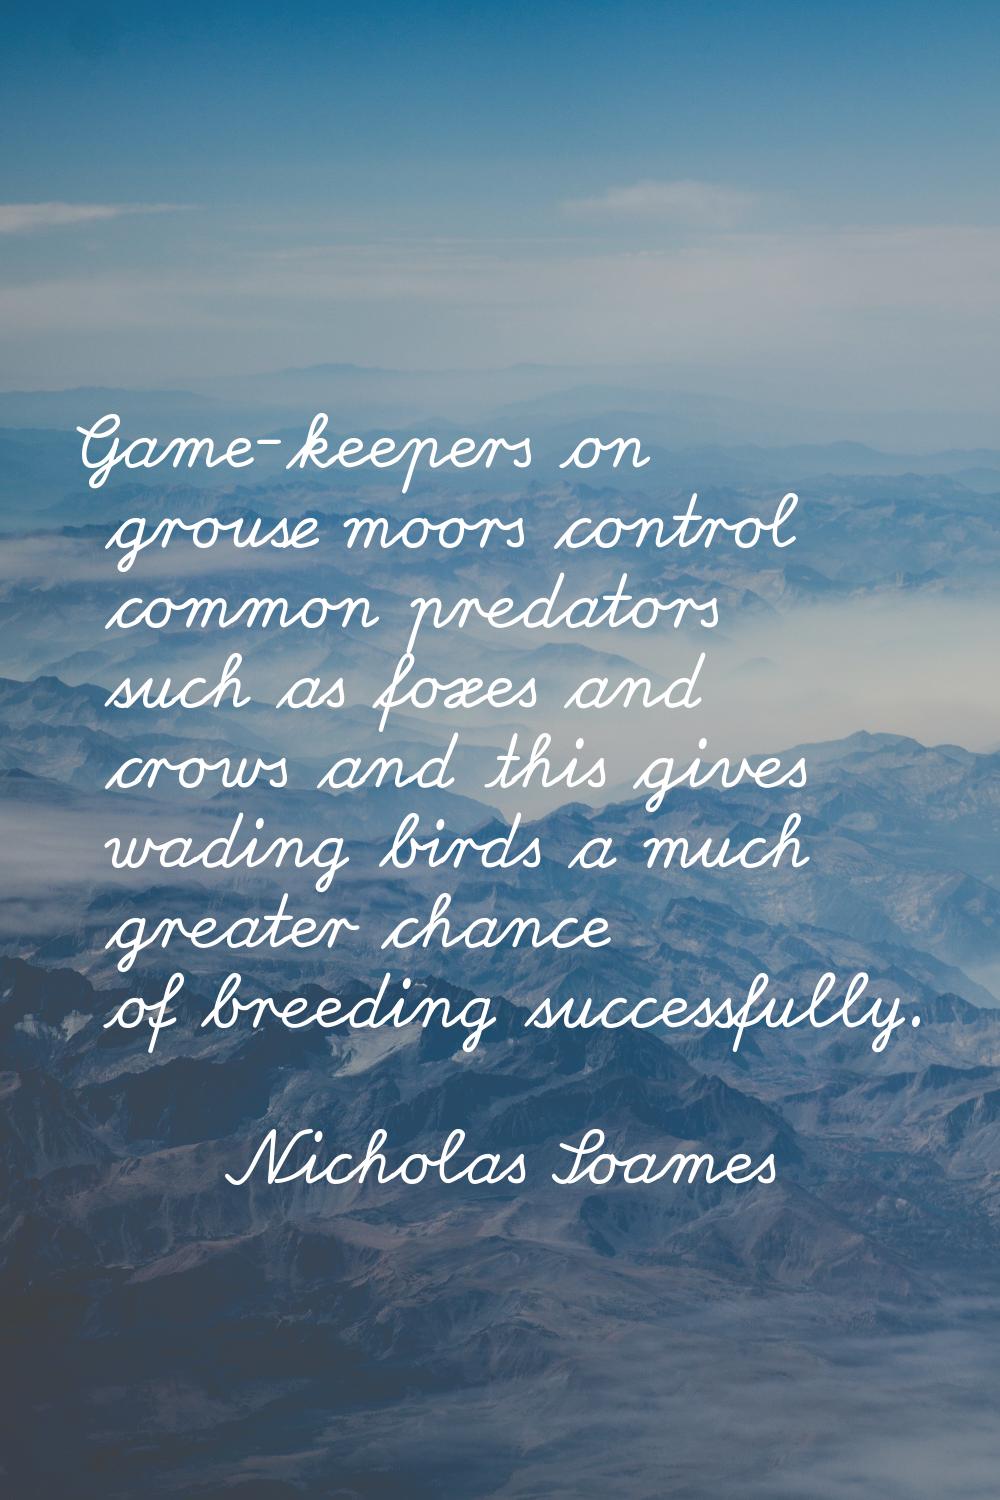 Game-keepers on grouse moors control common predators such as foxes and crows and this gives wading